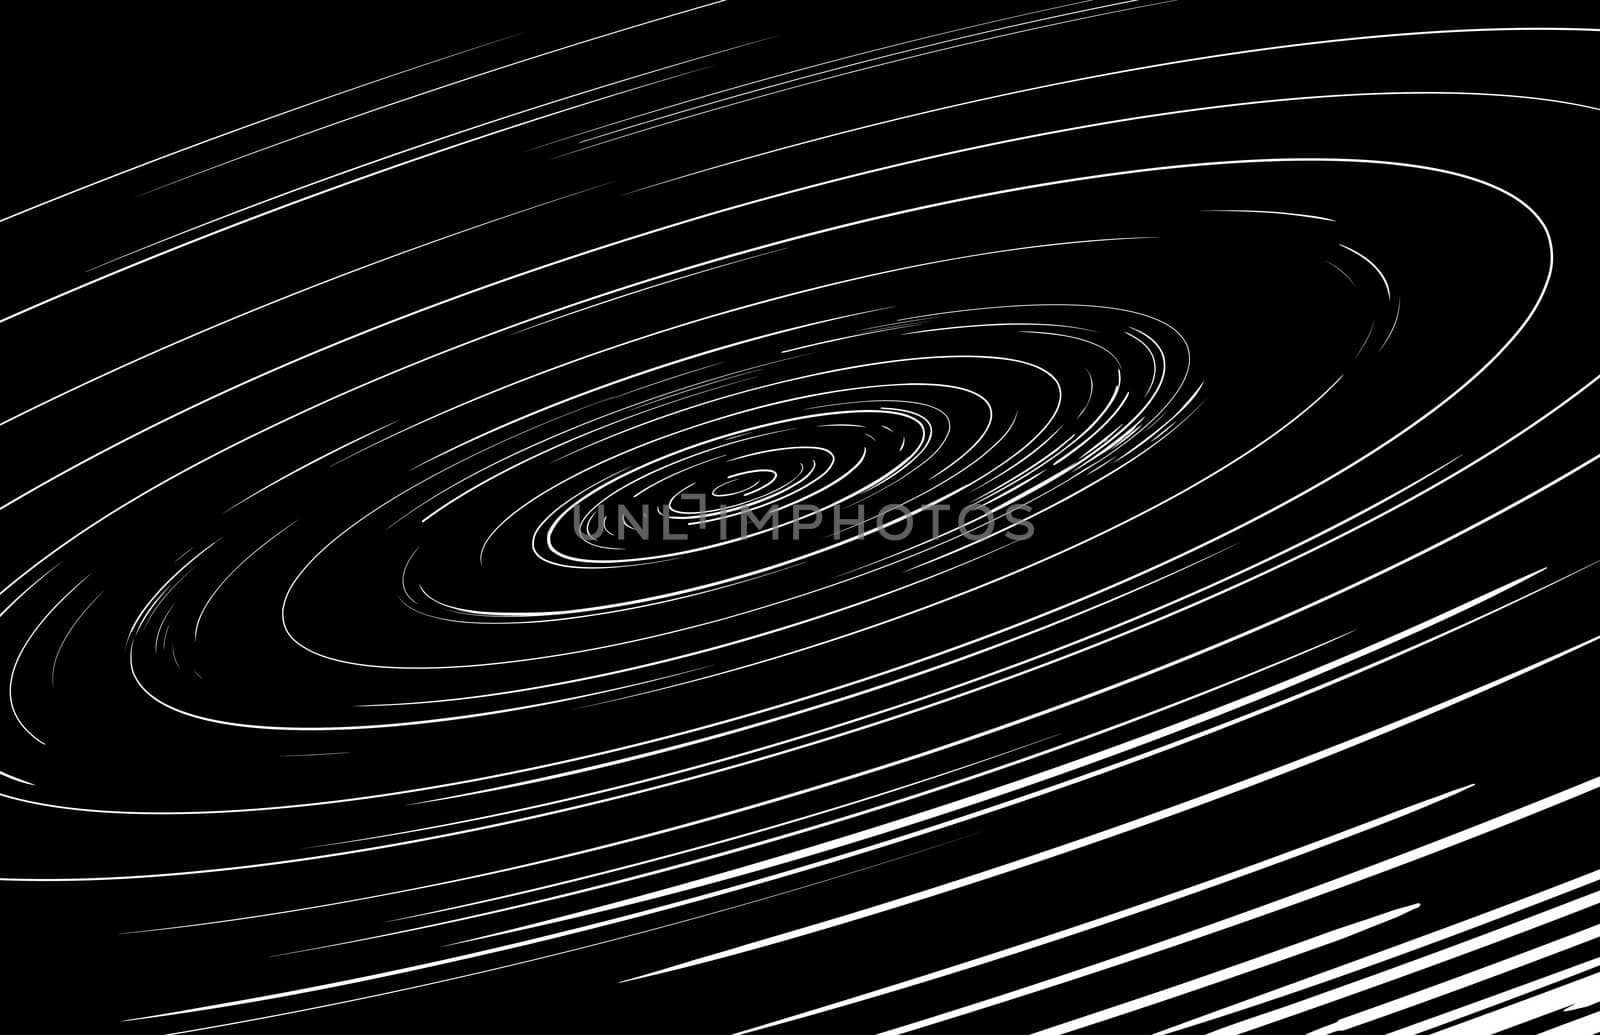 Abstract black hole or spinning whirlpool spiral illustration